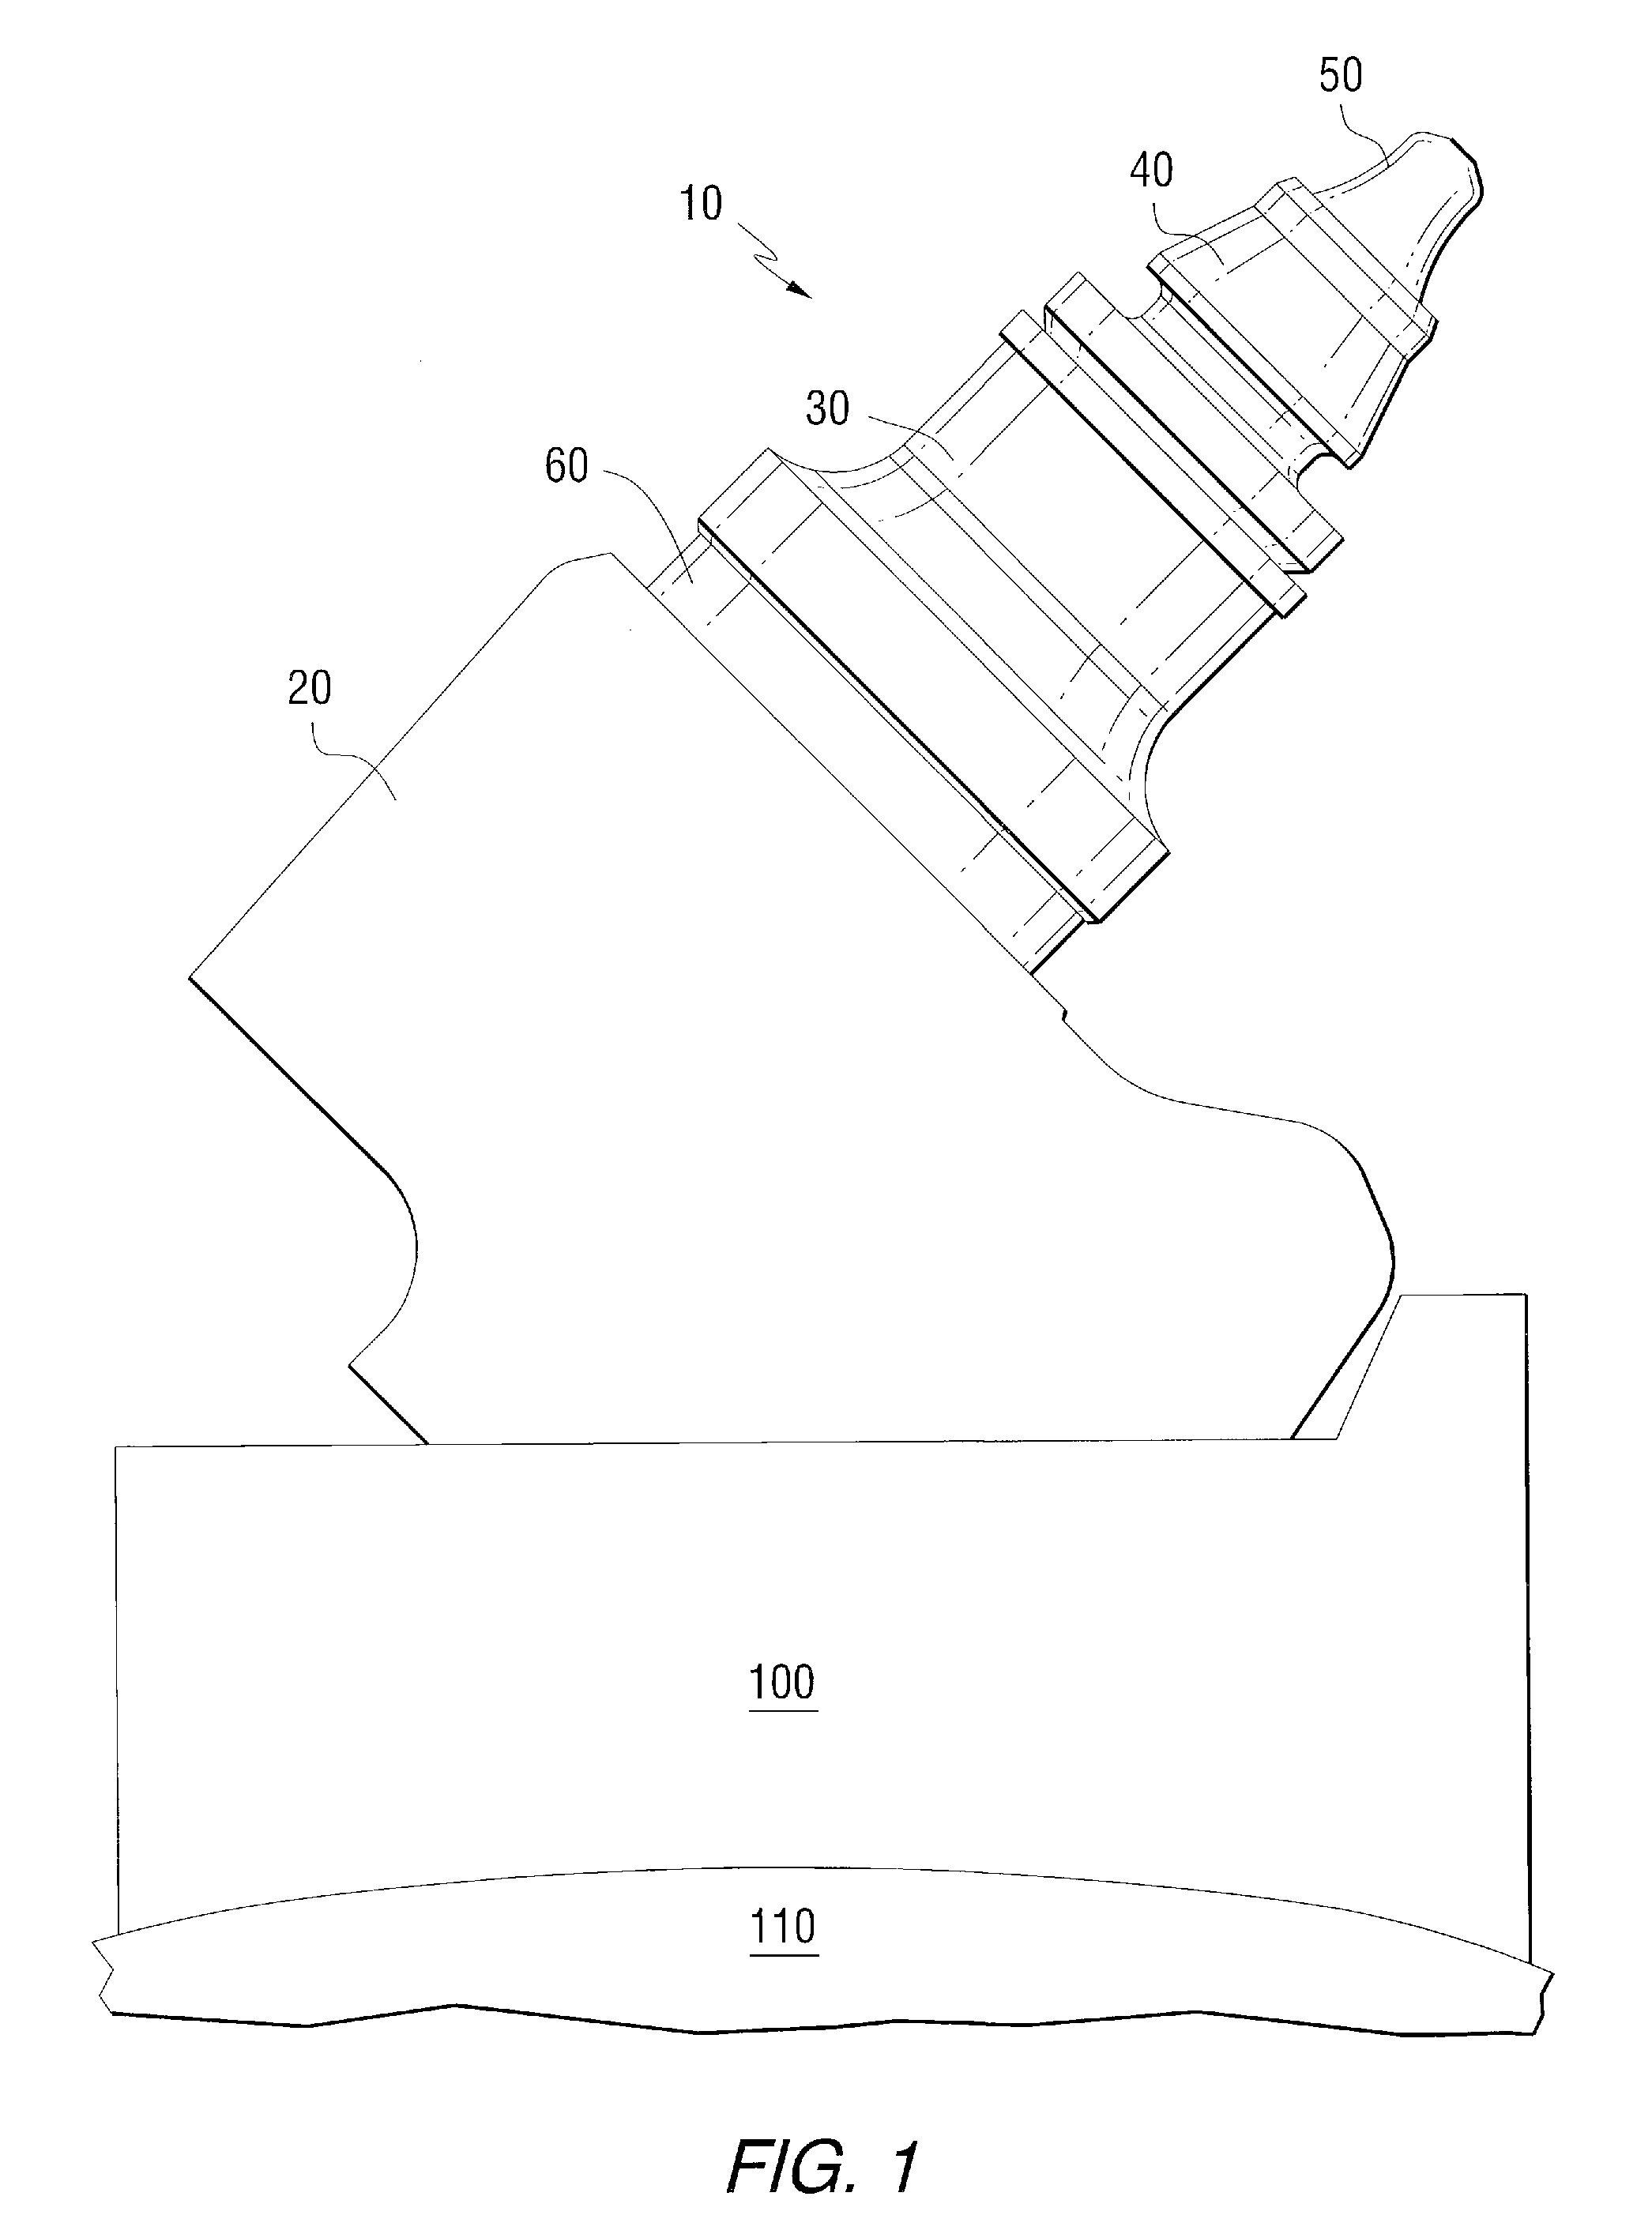 Cutting tool with water injection to the cutting bit shank